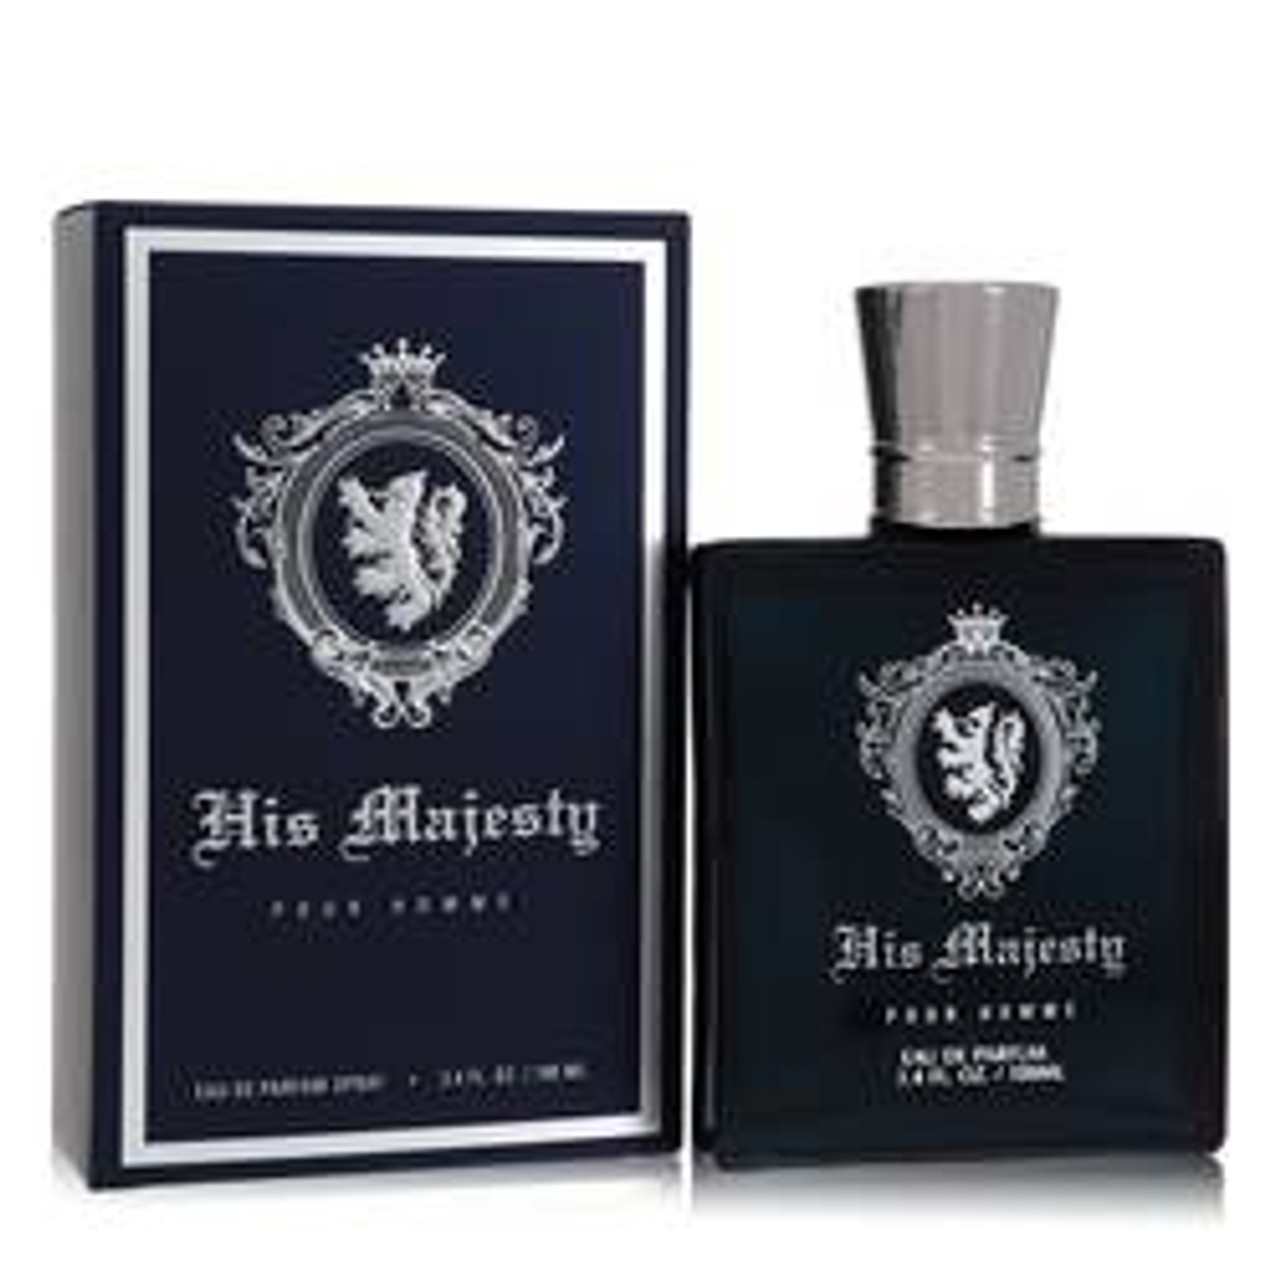 His Majesty Cologne By YZY Perfume Eau De Parfum Spray 3.4 oz for Men - [From 43.00 - Choose pk Qty ] - *Ships from Miami